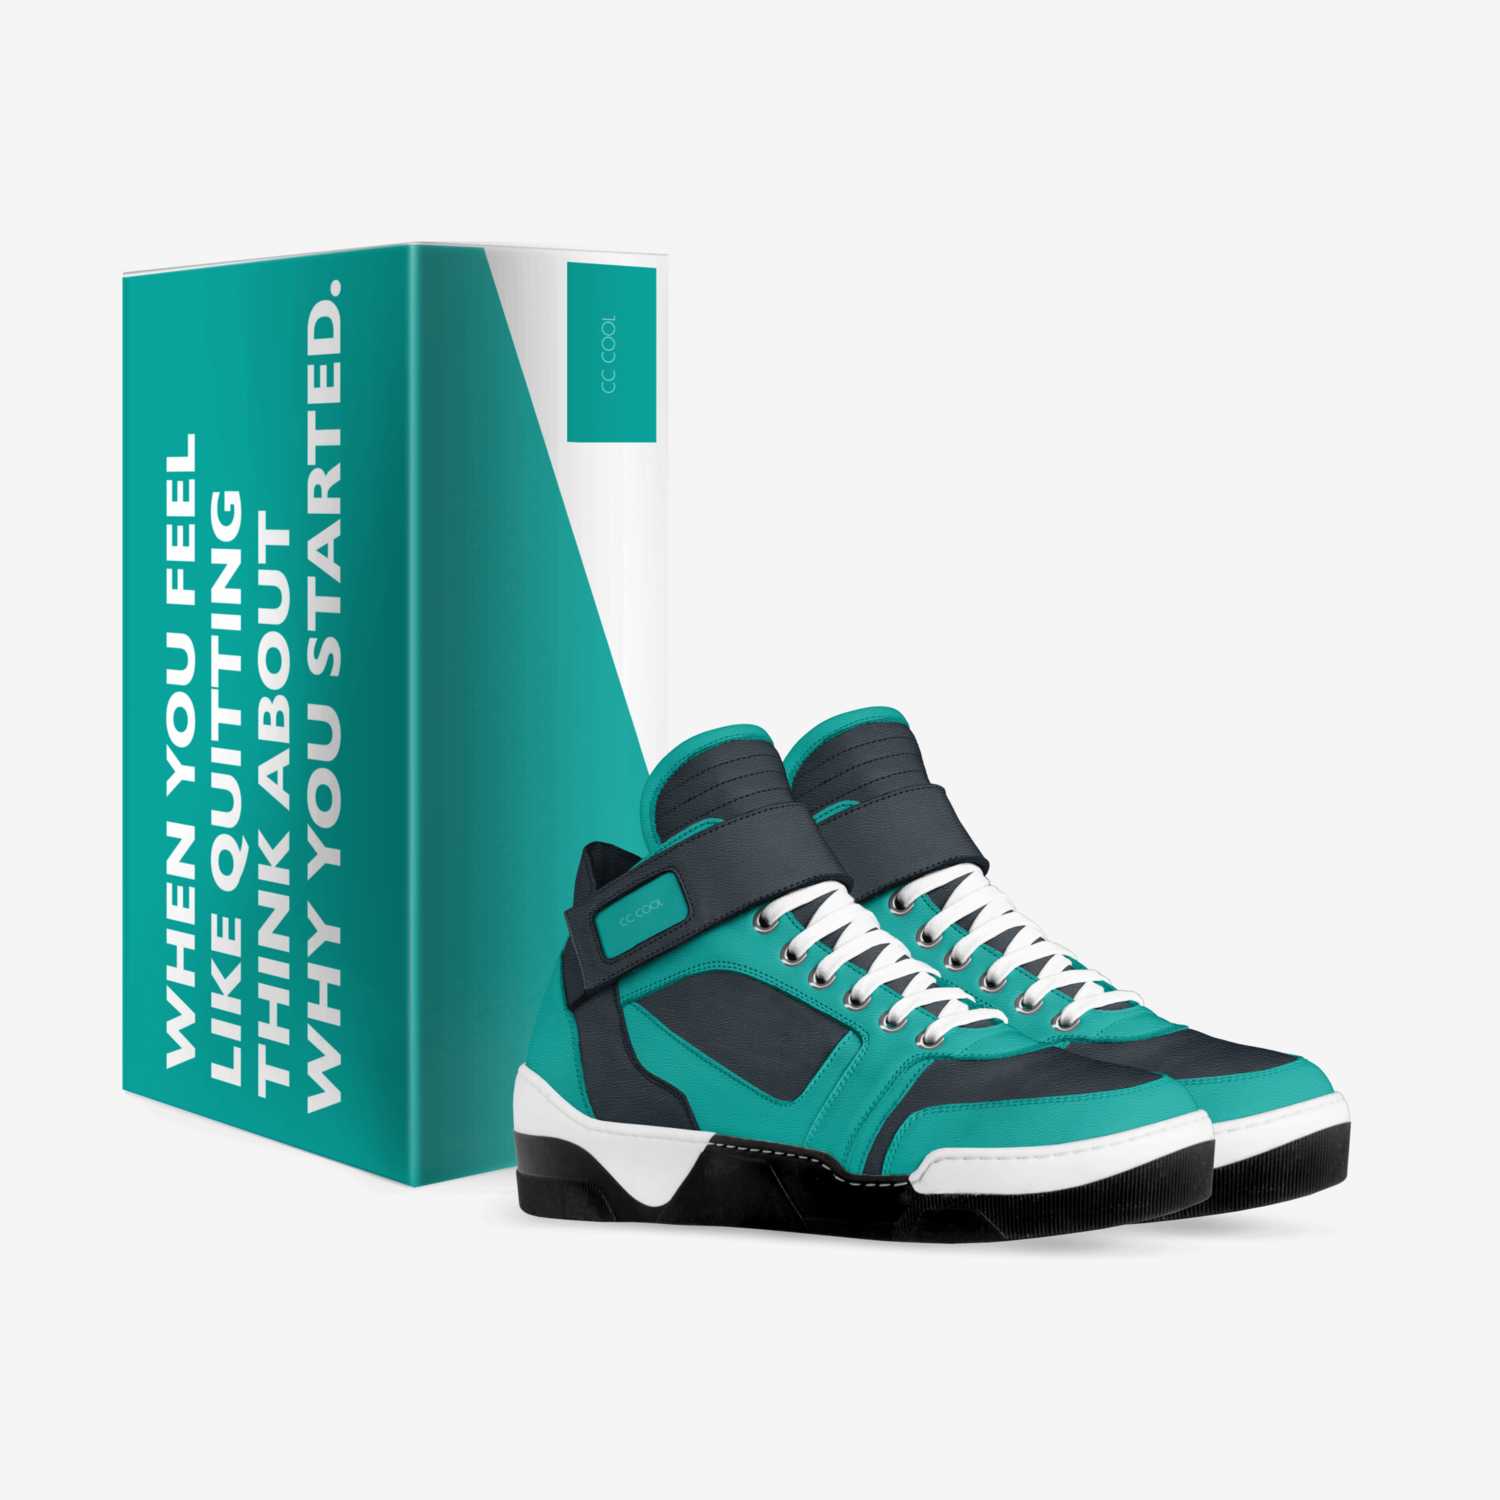 CC cool | A Custom Shoe concept by Sierra Terry